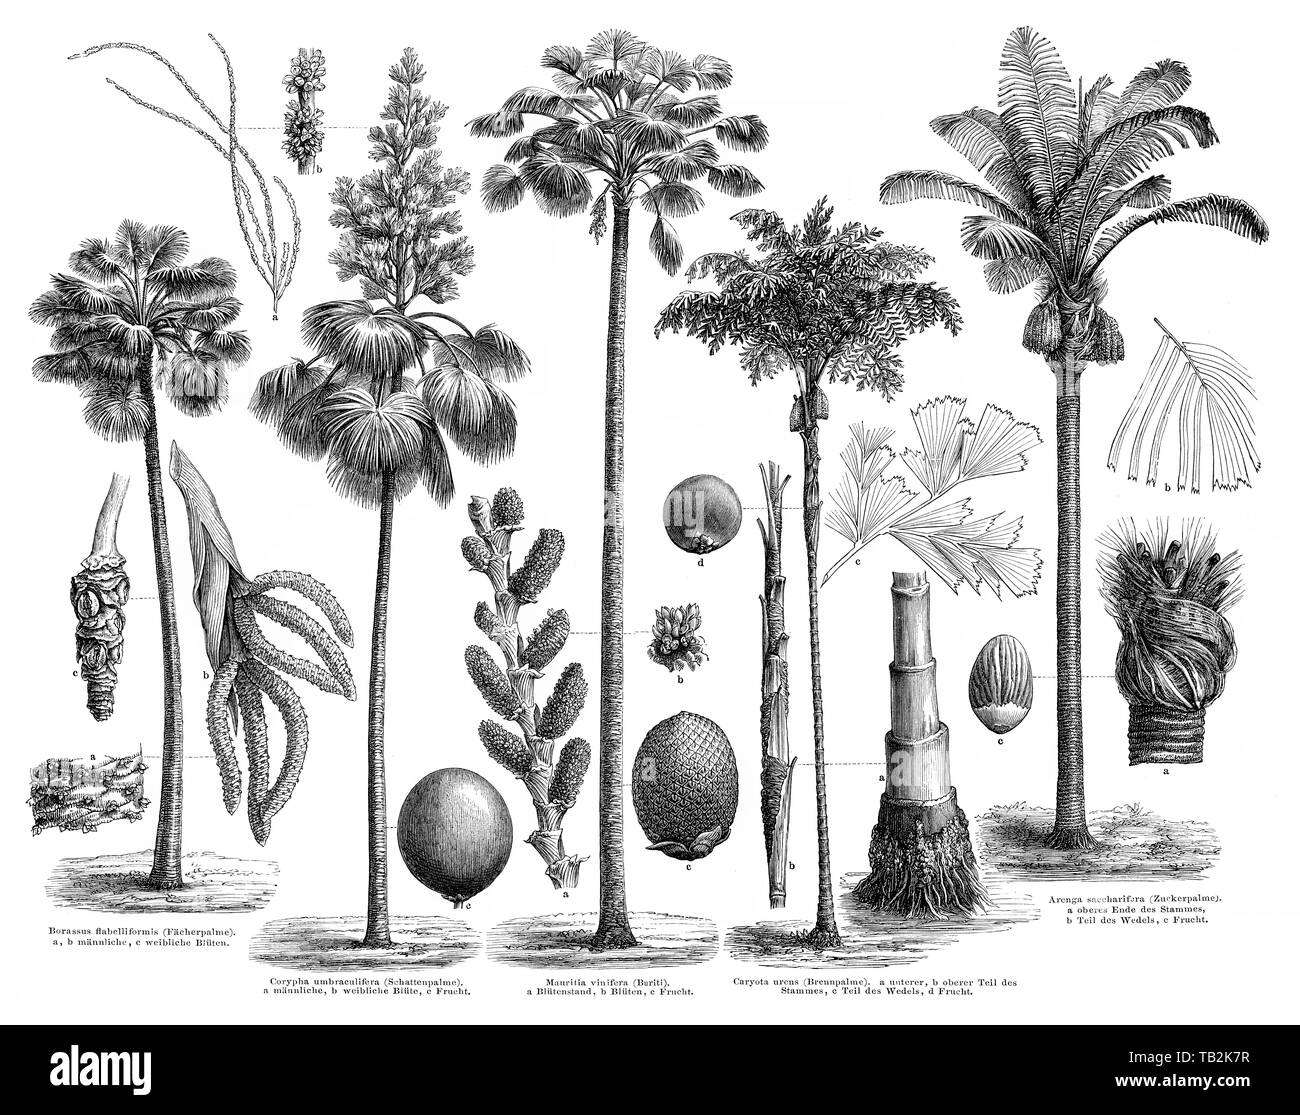 Algebraïsch Billy ledematen Arecaceae Palm Plants High Resolution Stock Photography and Images - Alamy